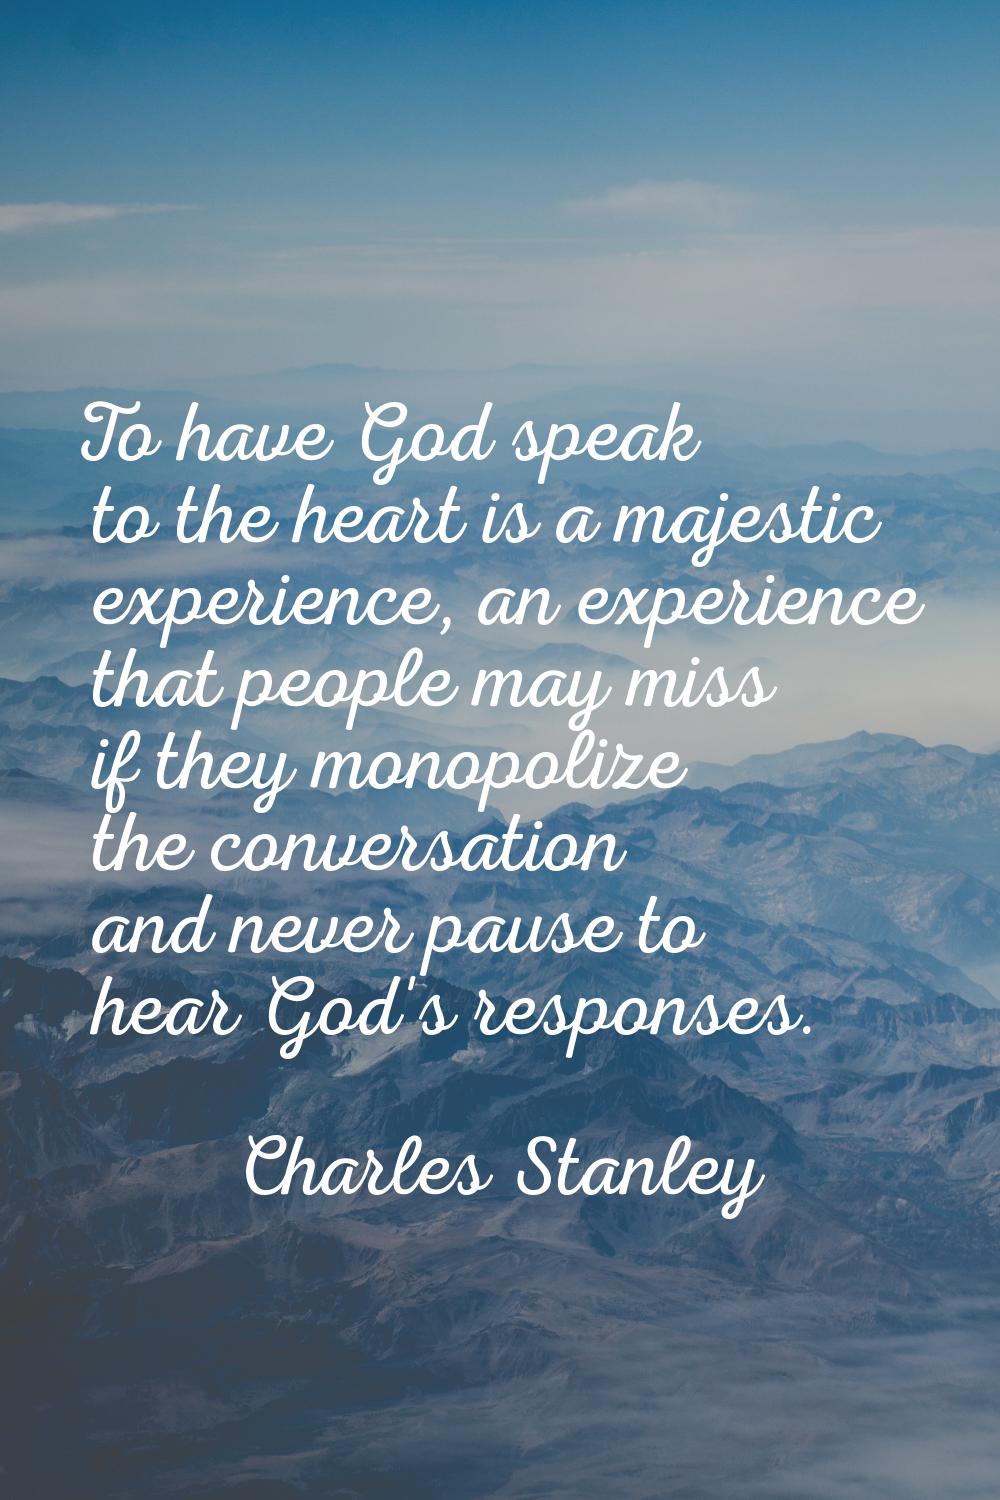 To have God speak to the heart is a majestic experience, an experience that people may miss if they